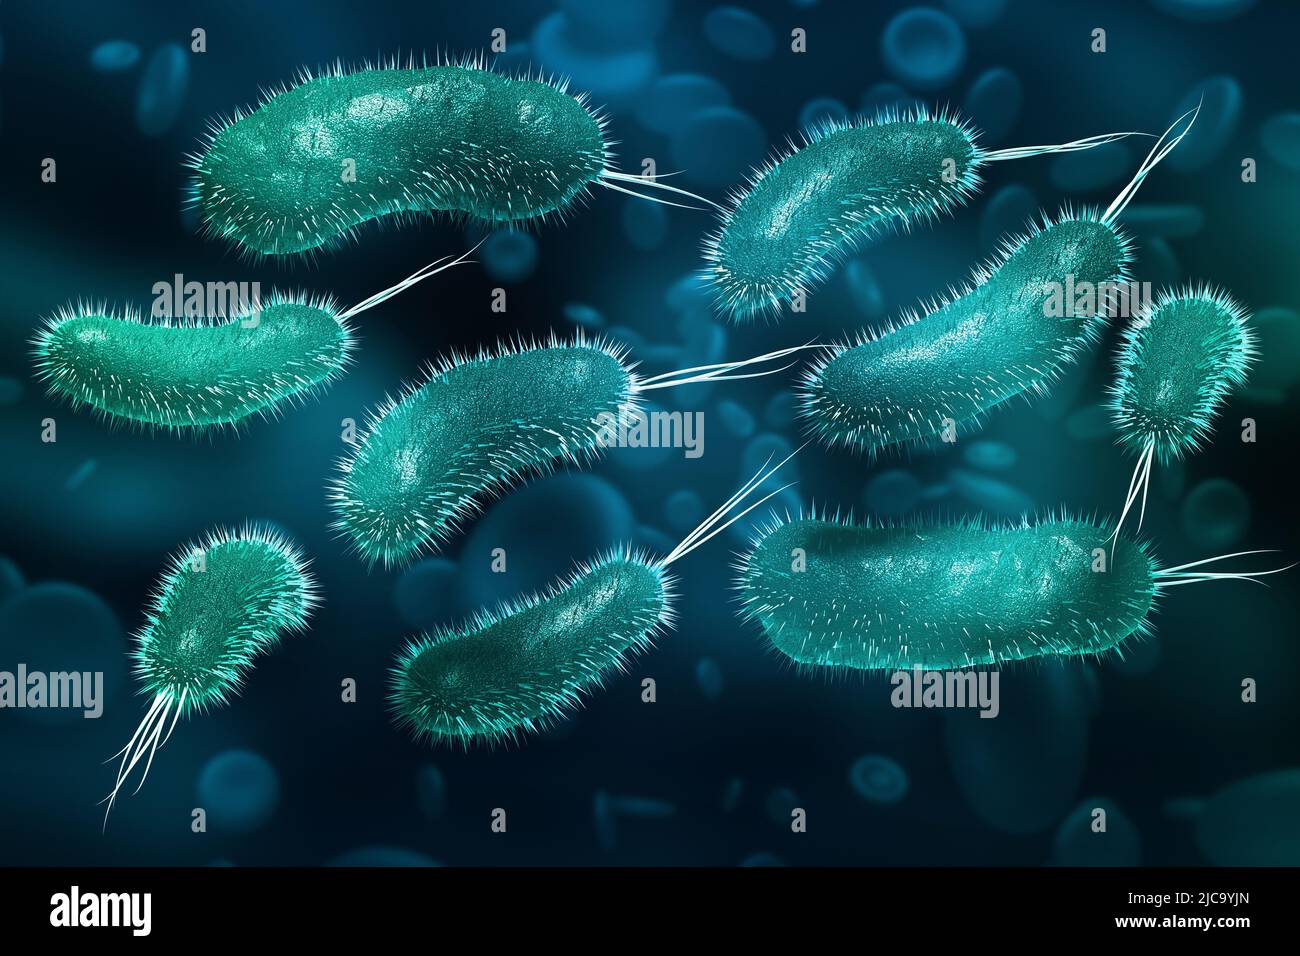 Microbes under a microscope. Viruses and microorganisms. 3d illustration on the topic of scientific research Stock Photo